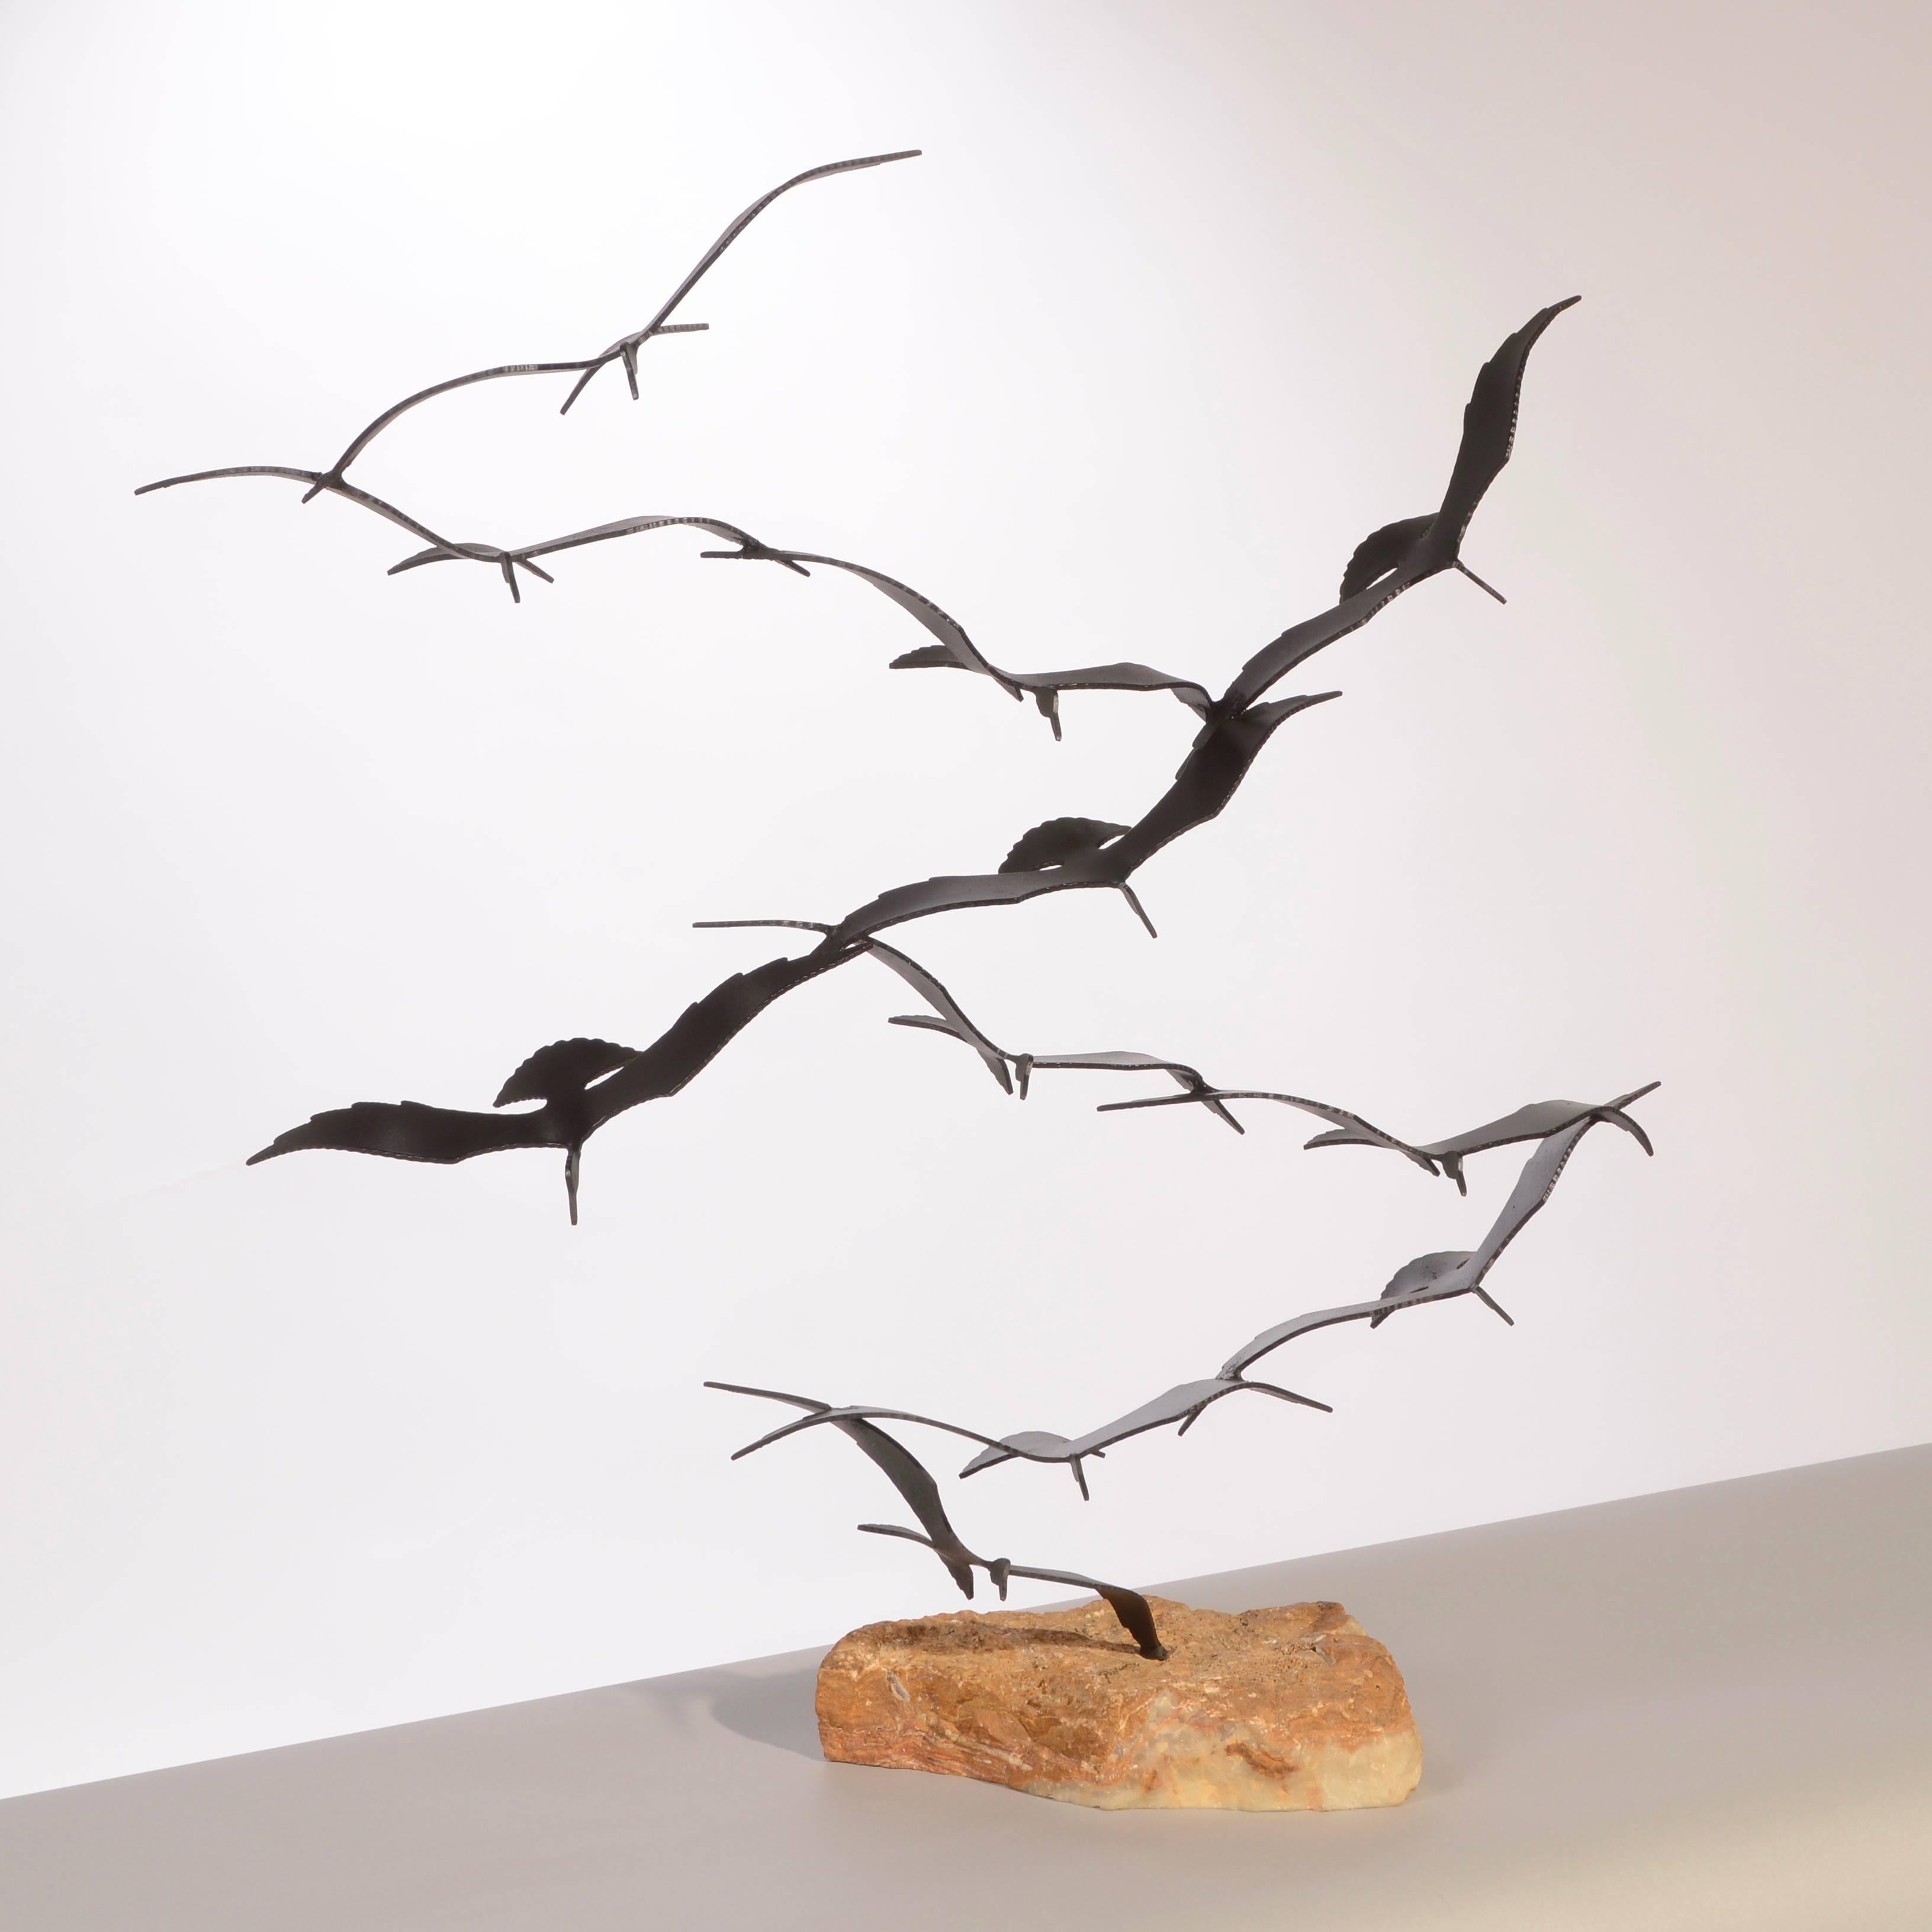 A kinetic sculpture, this flock of seagulls is poetry in motion. The rough cut of the onyx base contrasts to the lightness and smoothness of the flying birds made from solid brass.